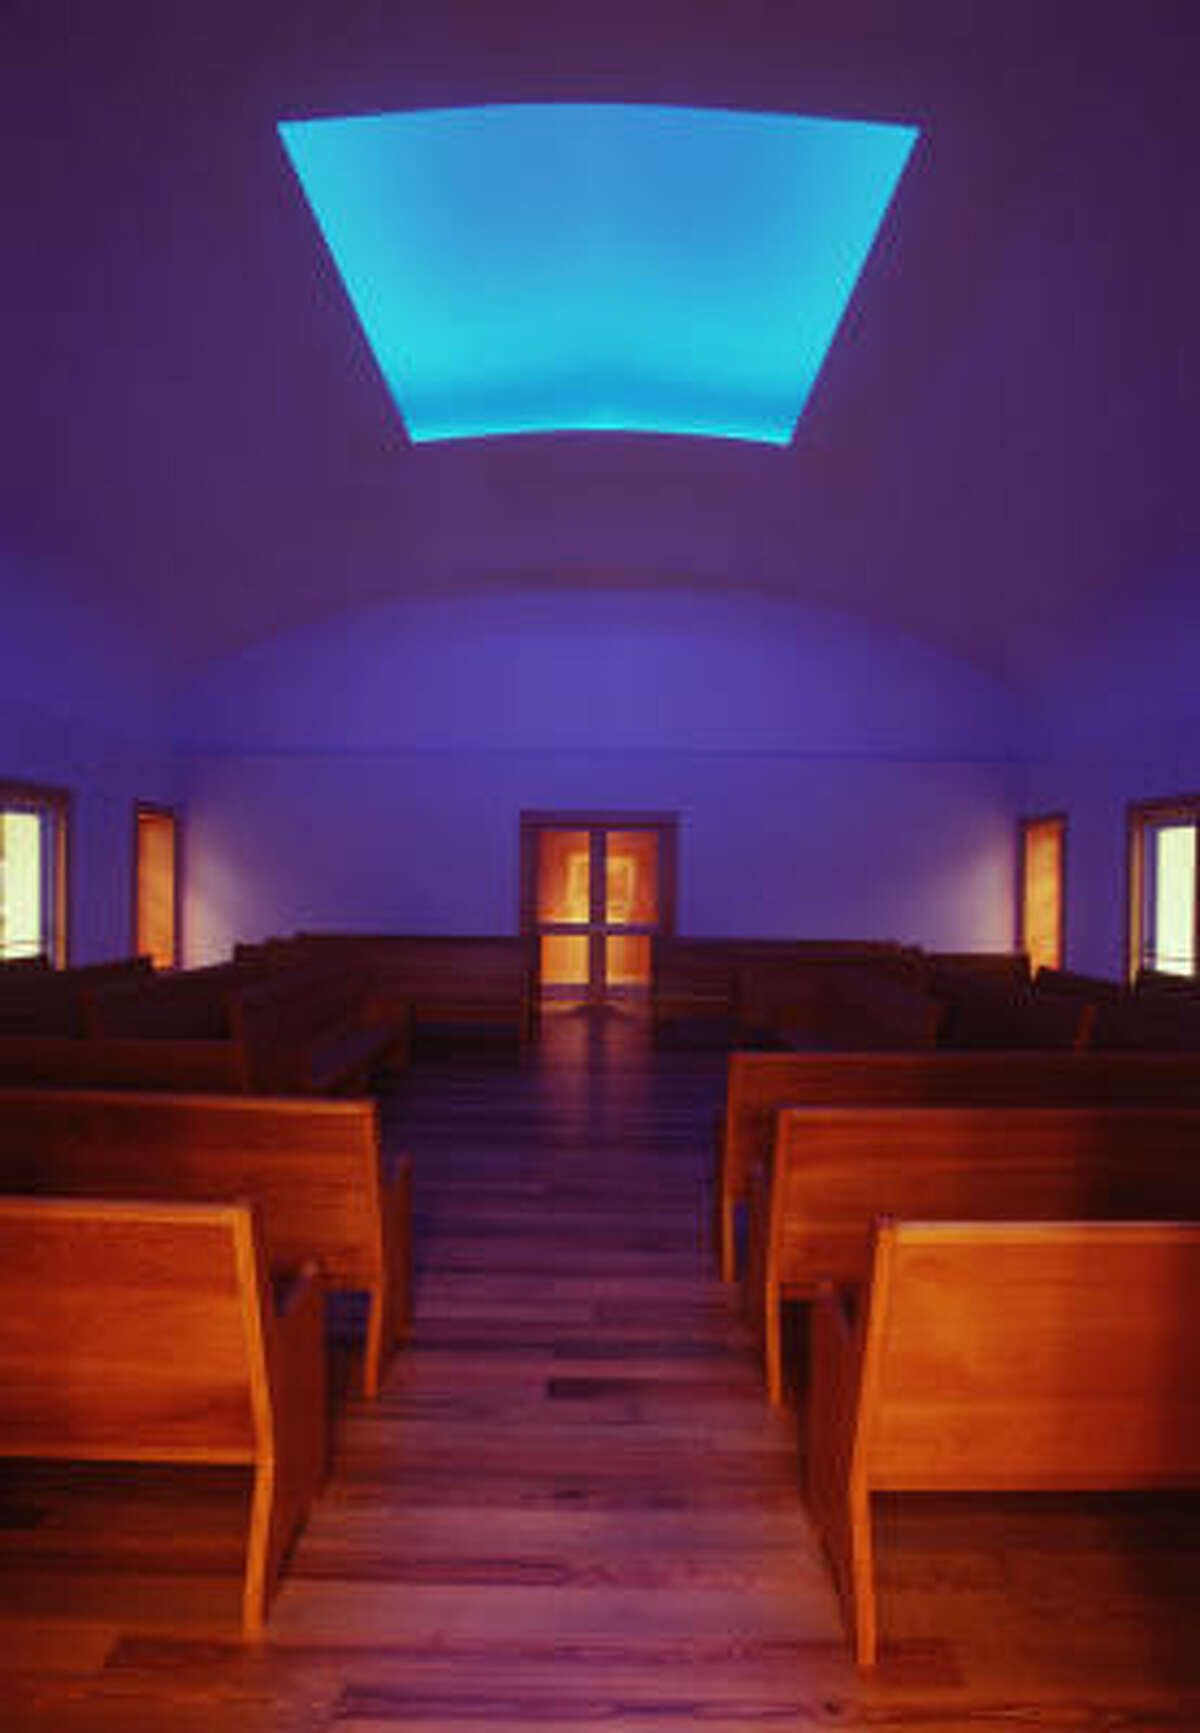 Photos of artist James Turrell's Skyspace from before the roof repairs show the diffferent qualities of light the work lets into the Live Oak Friends Meeting House.